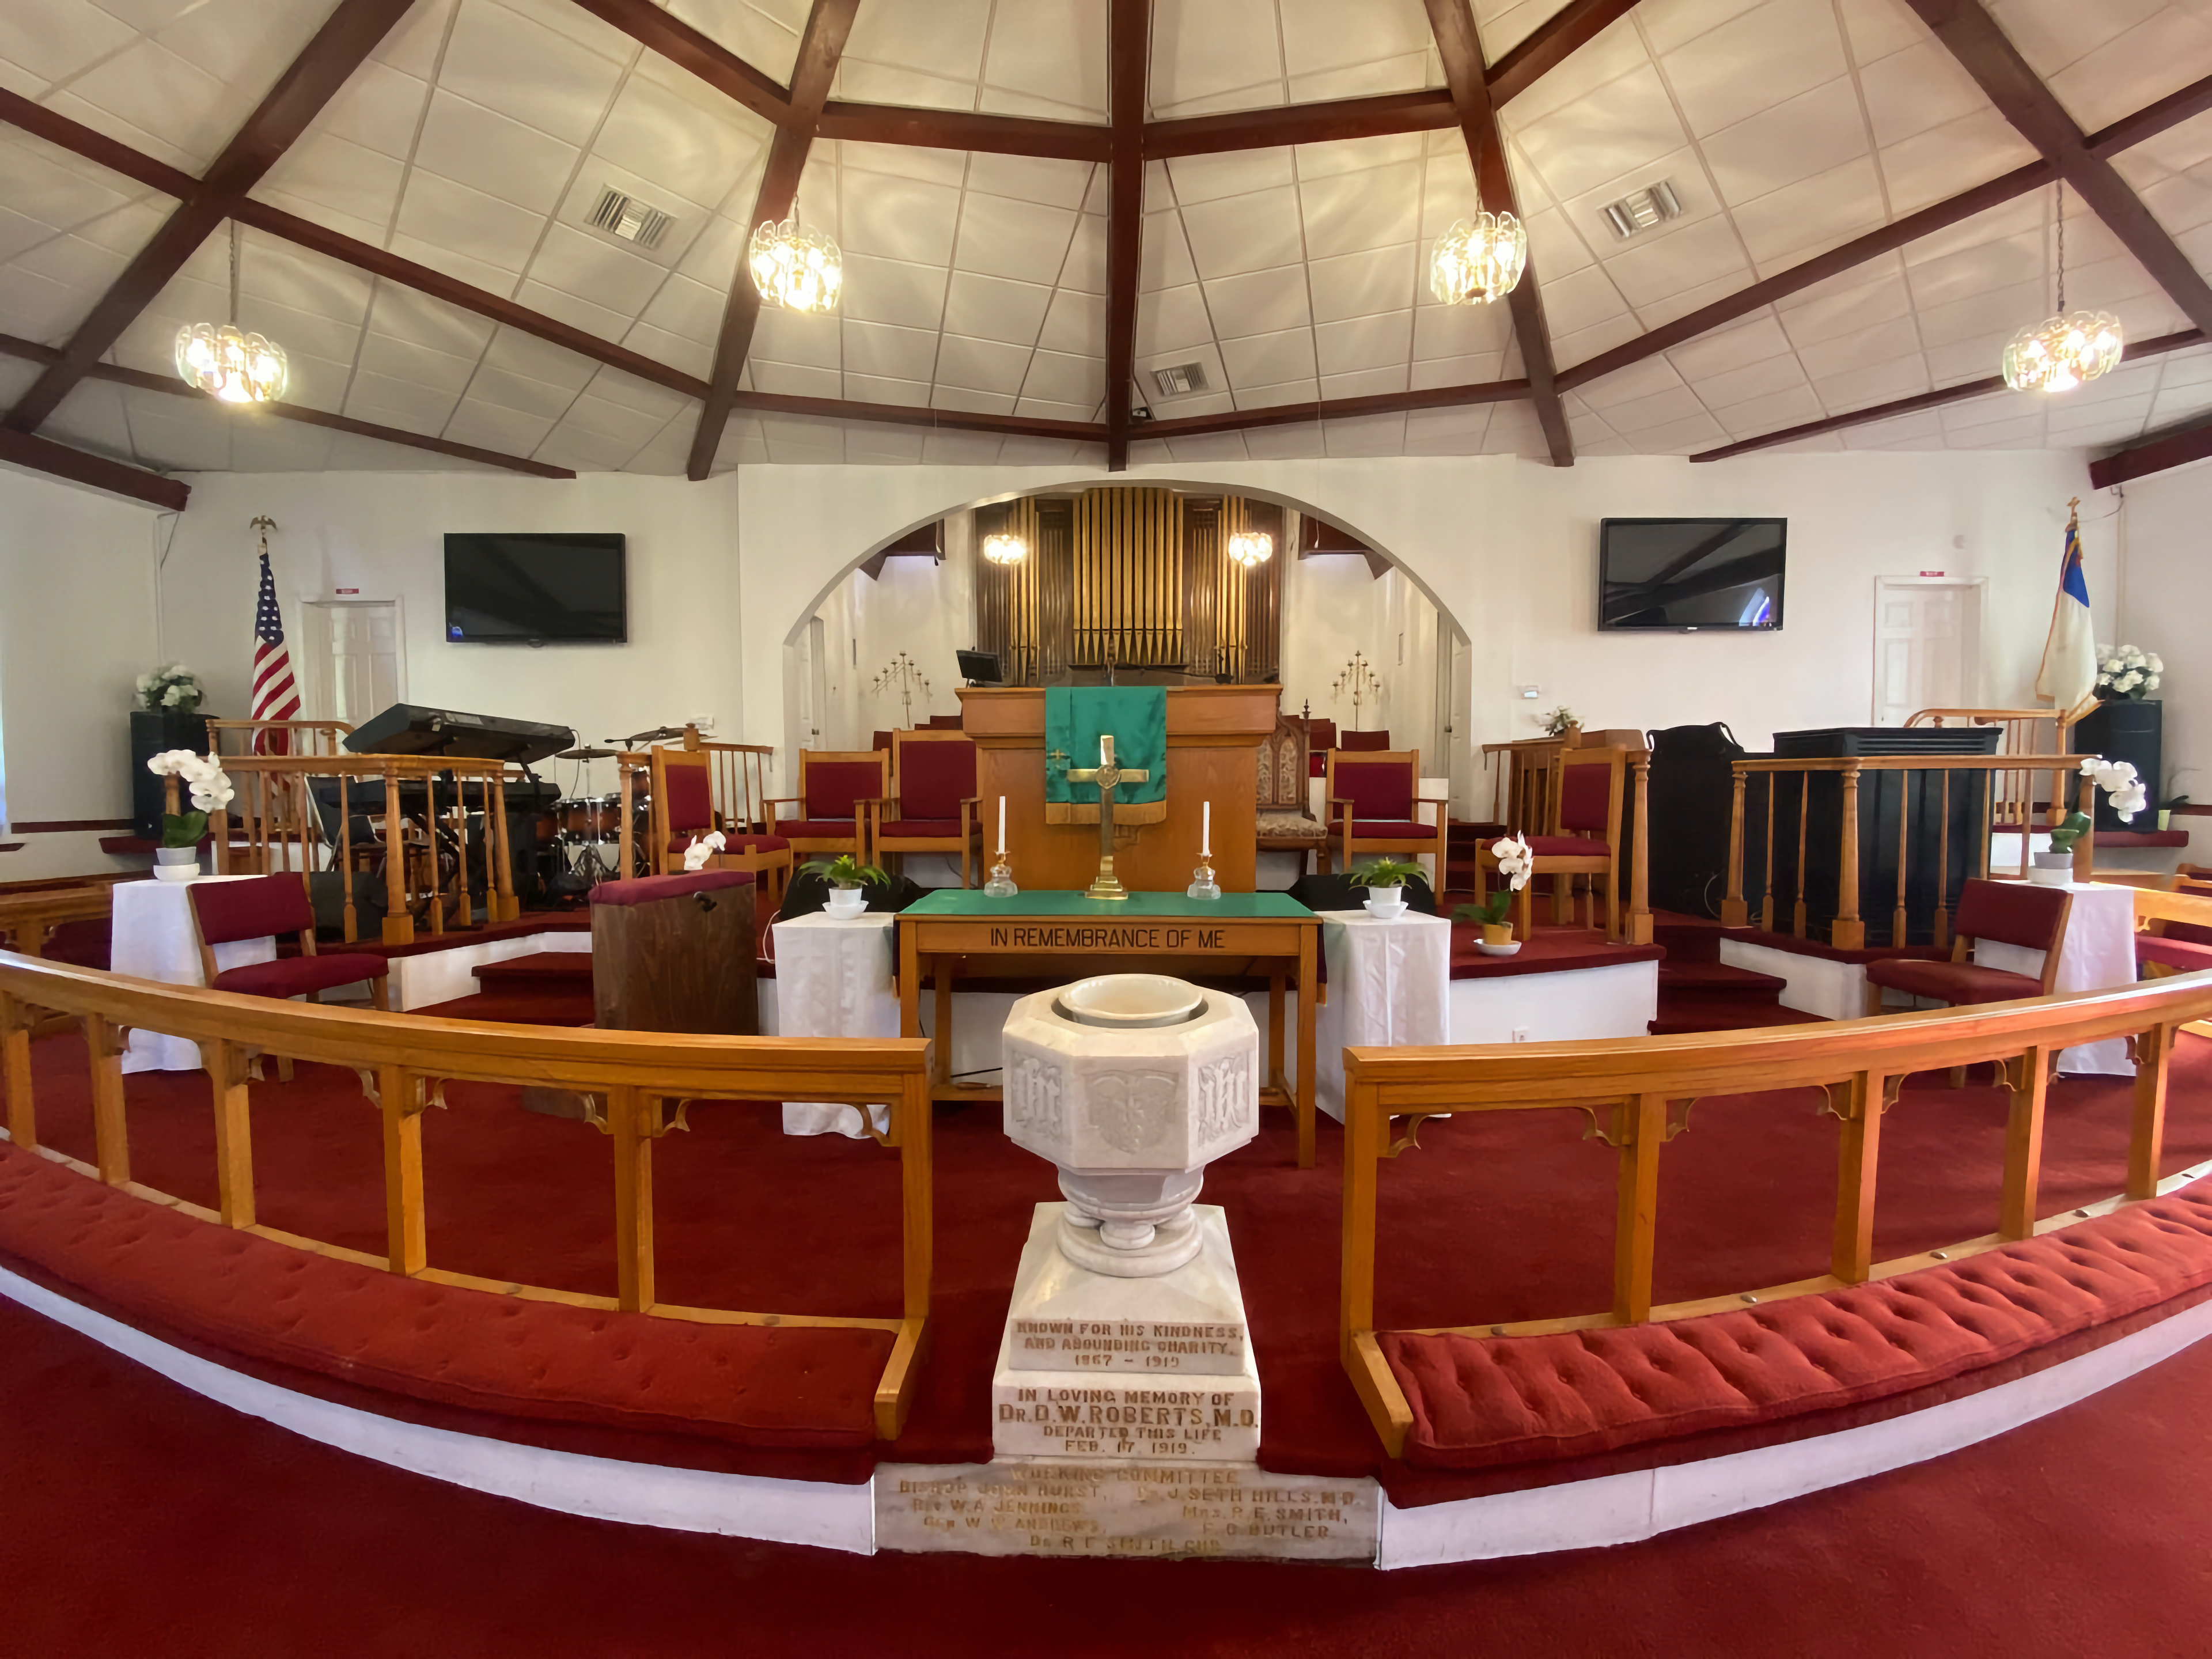 The altar and baptismal font in St. Paul AME Church in St. Augustine, Florida.